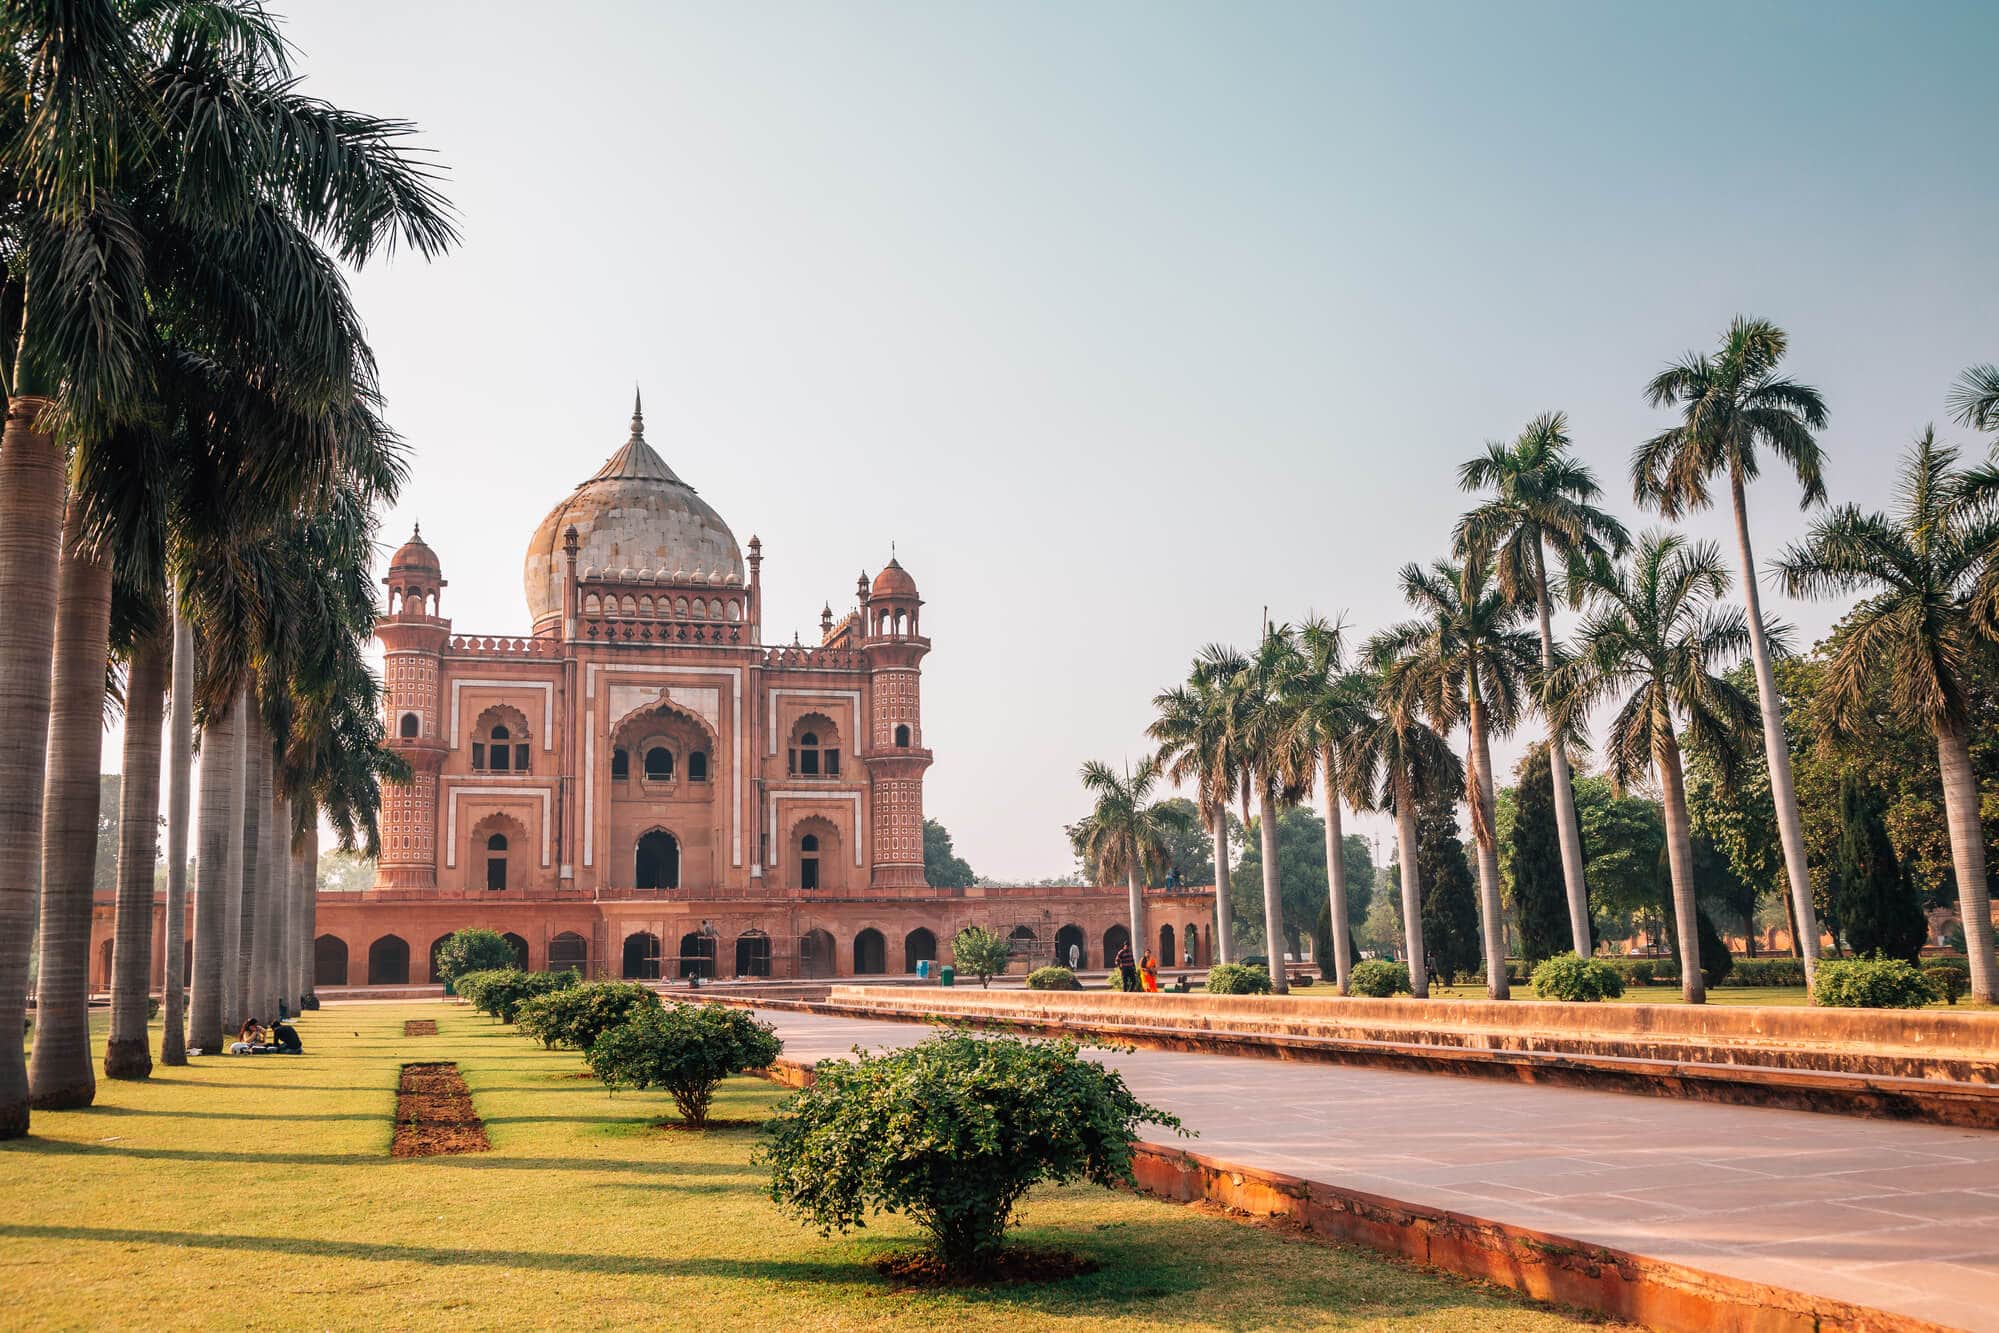 A first timer's guide to Delhi, India - Tomb of Safdarjung